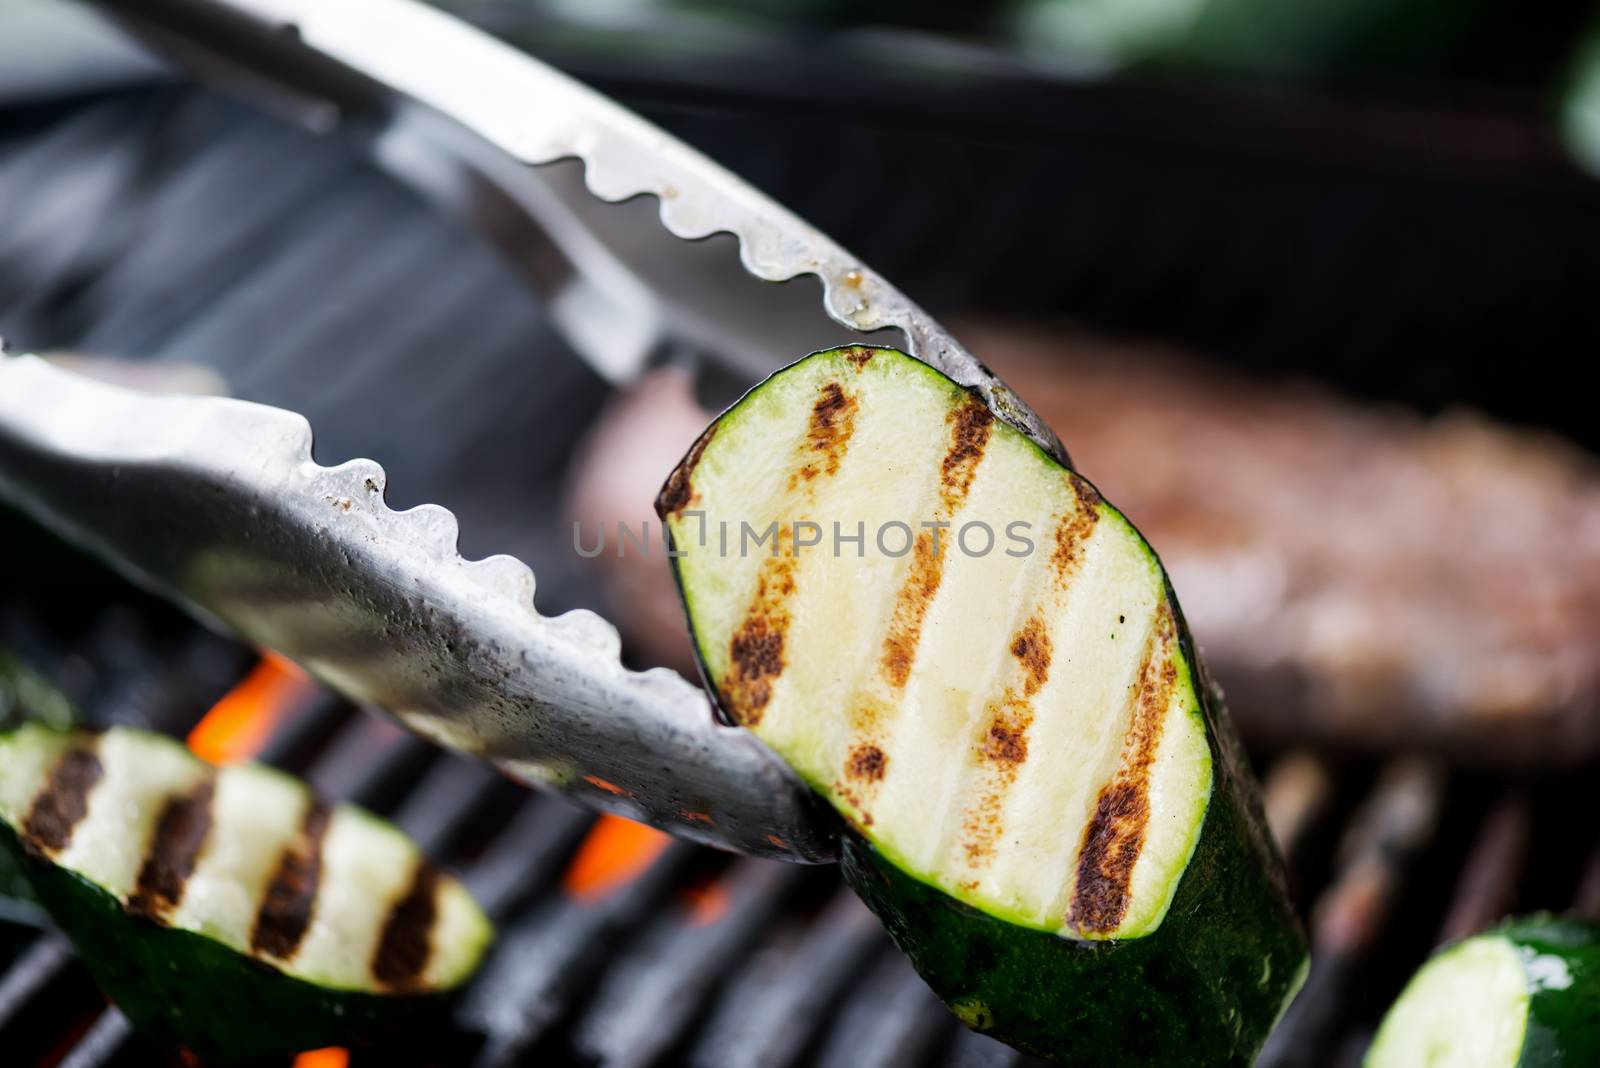 Cooking aubergine or eggplant on grill with olive oil. Delicious!